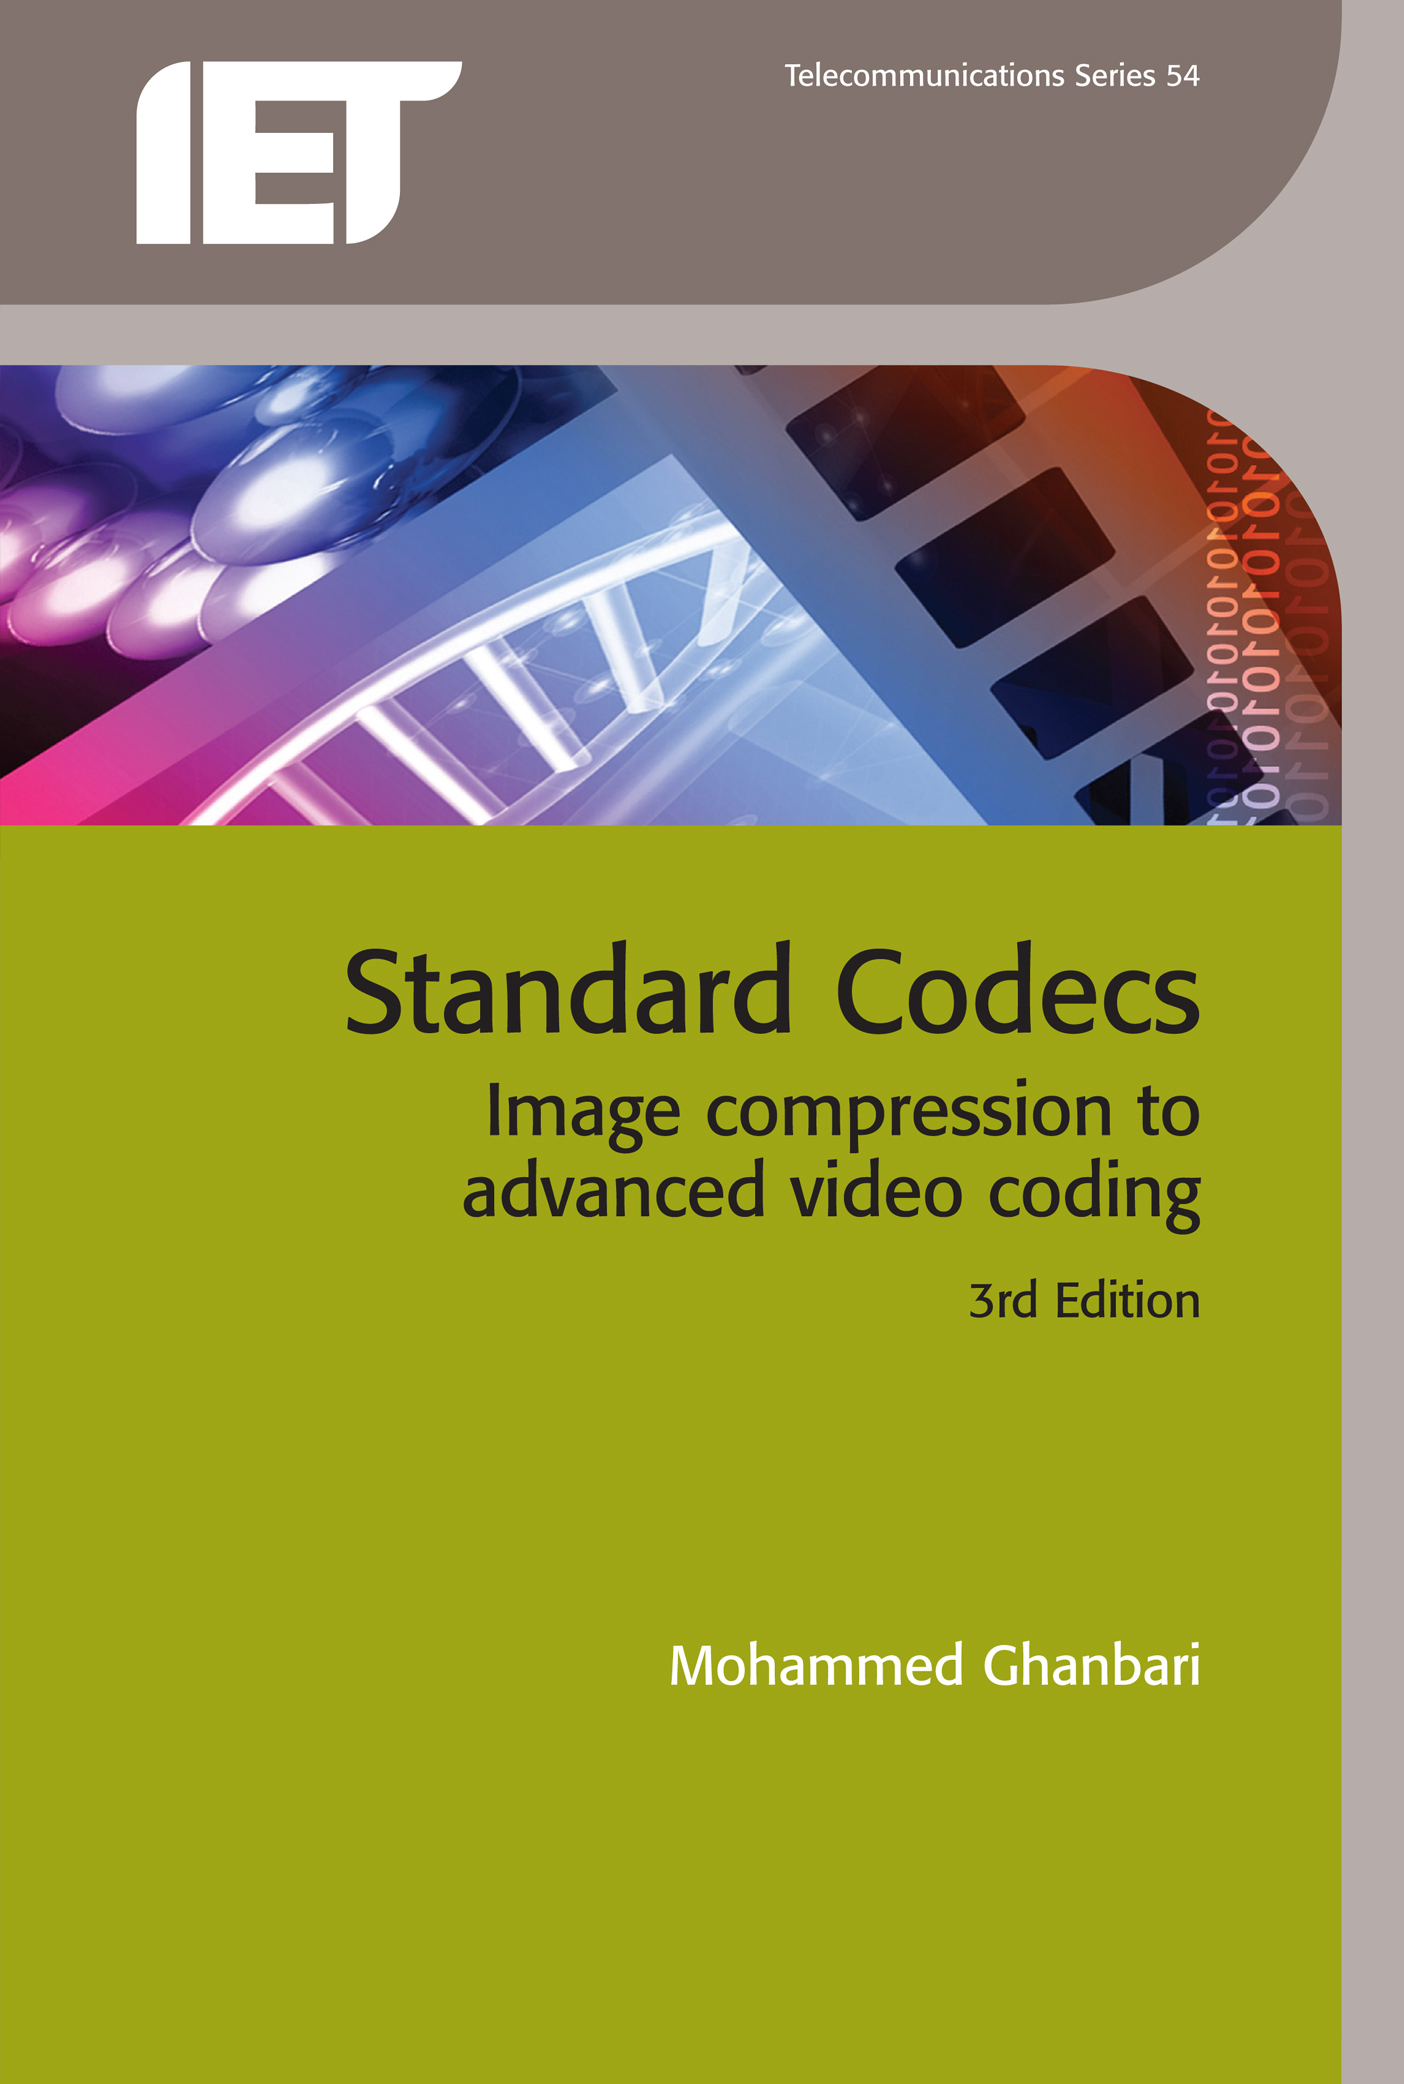 Standard Codecs, Image compression to advanced video coding, 3rd Edition